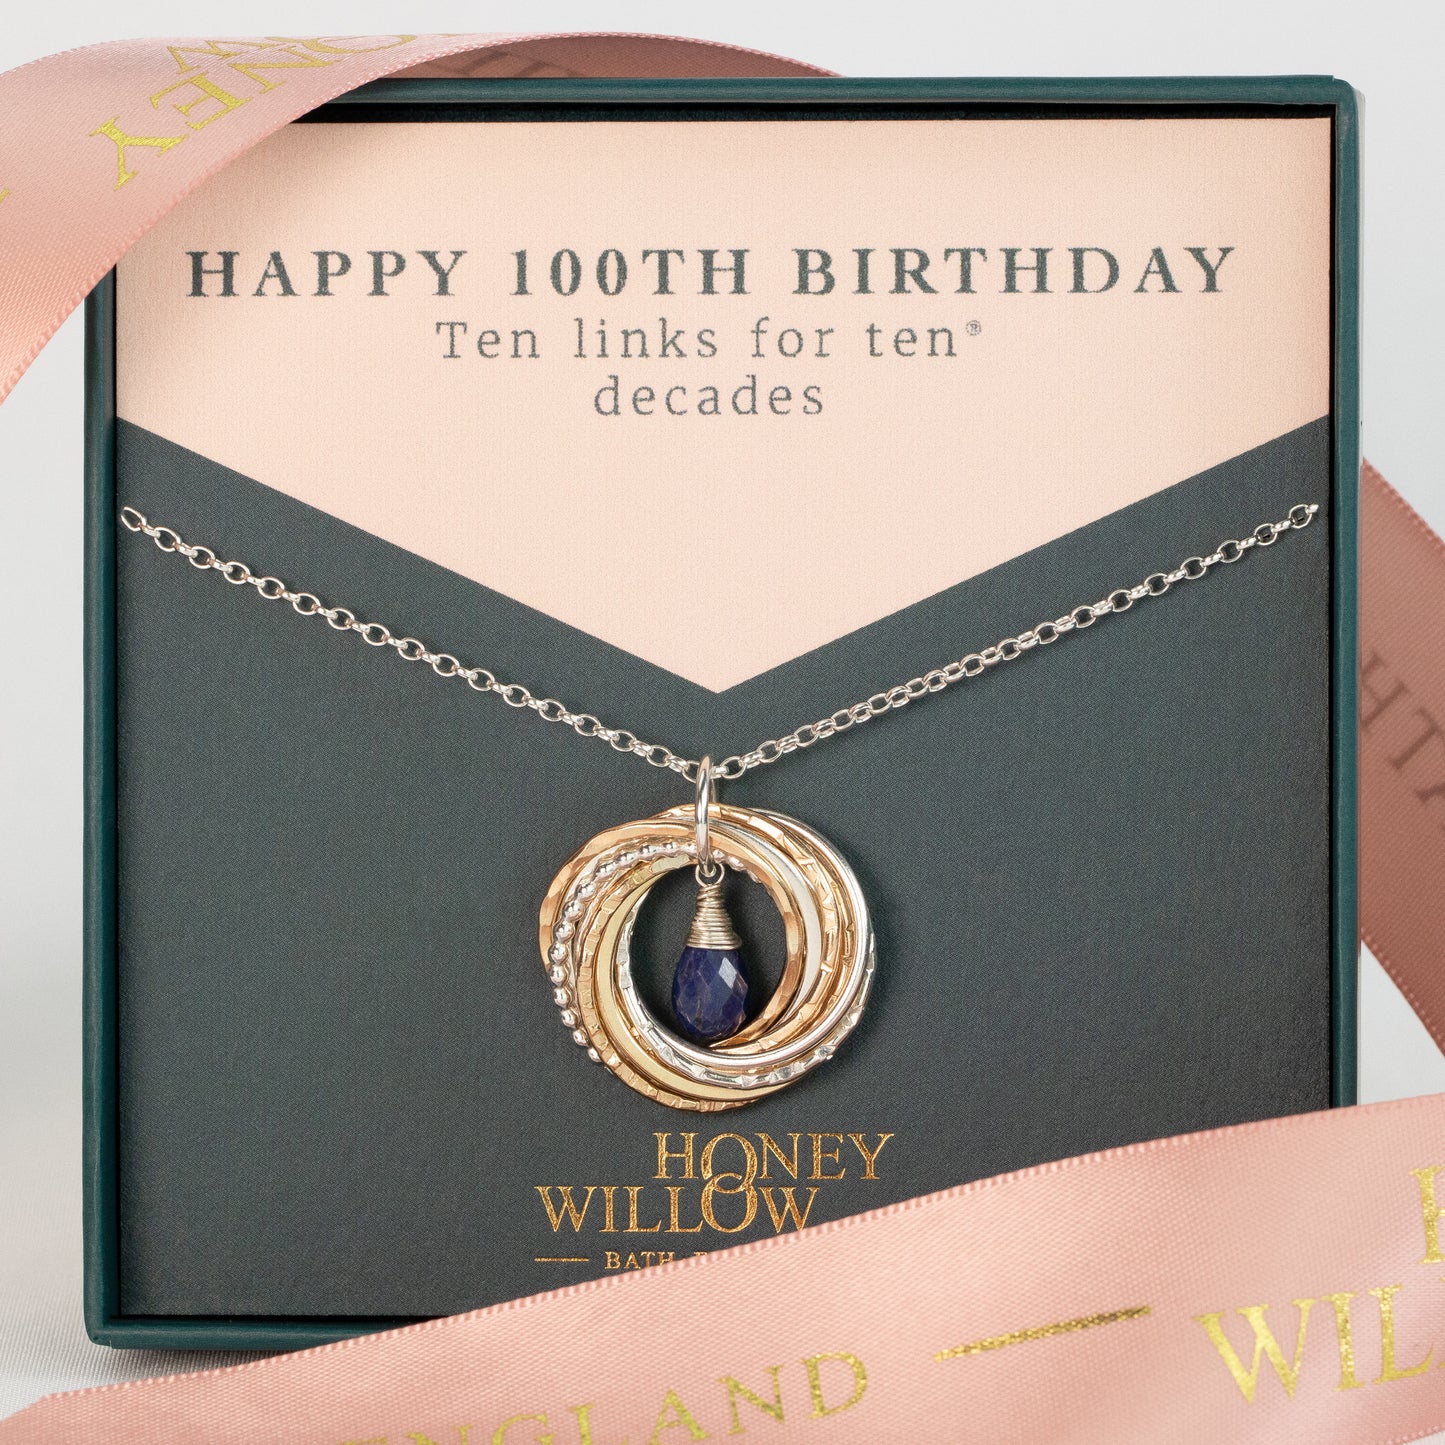 100th Birthday Birthstone Necklace - The Original 10 Links for 10 Decades Necklace - Silver & Gold